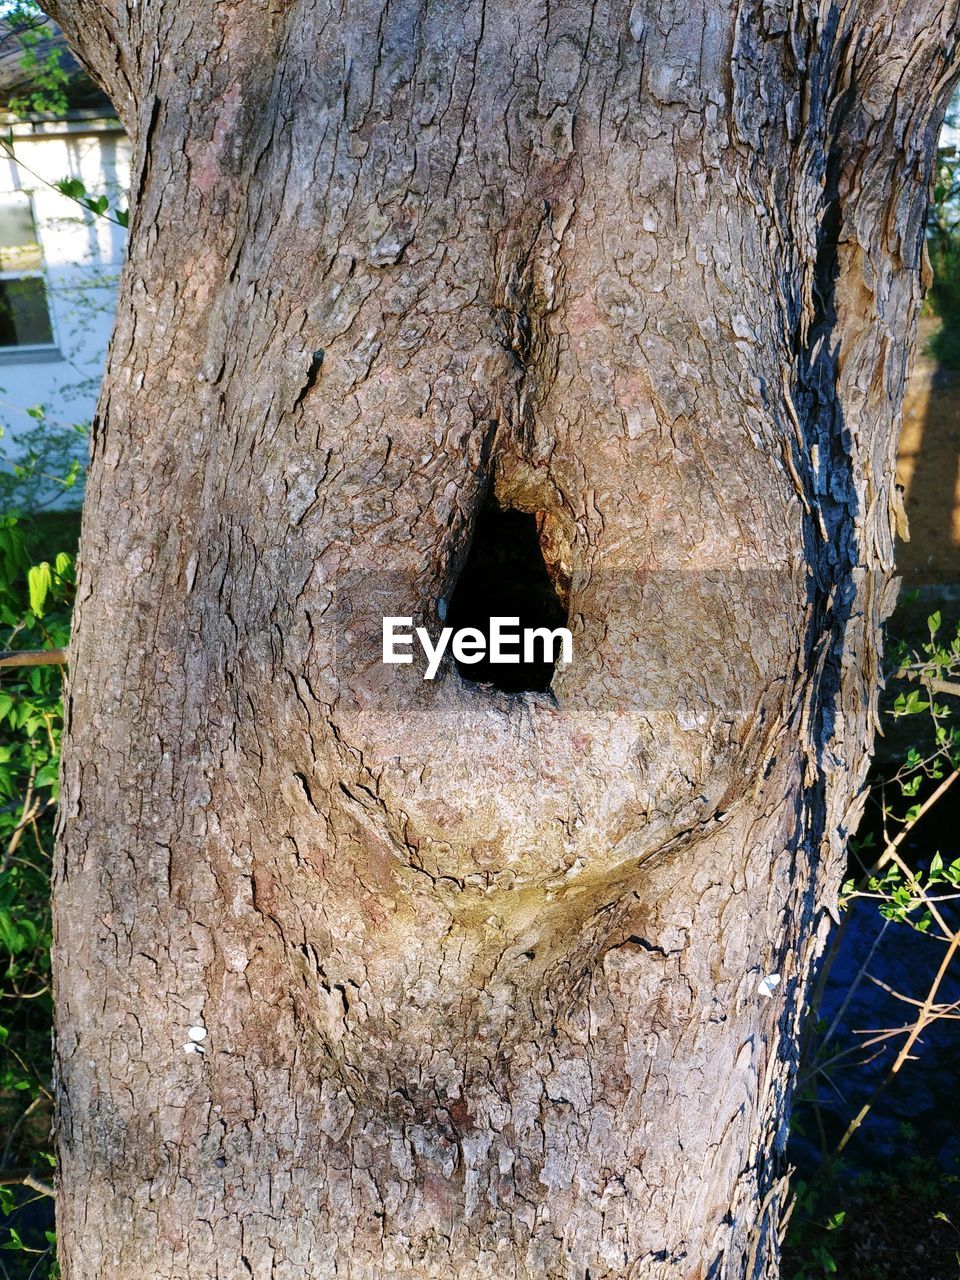 CLOSE-UP OF TREE TRUNK WITH HOLE